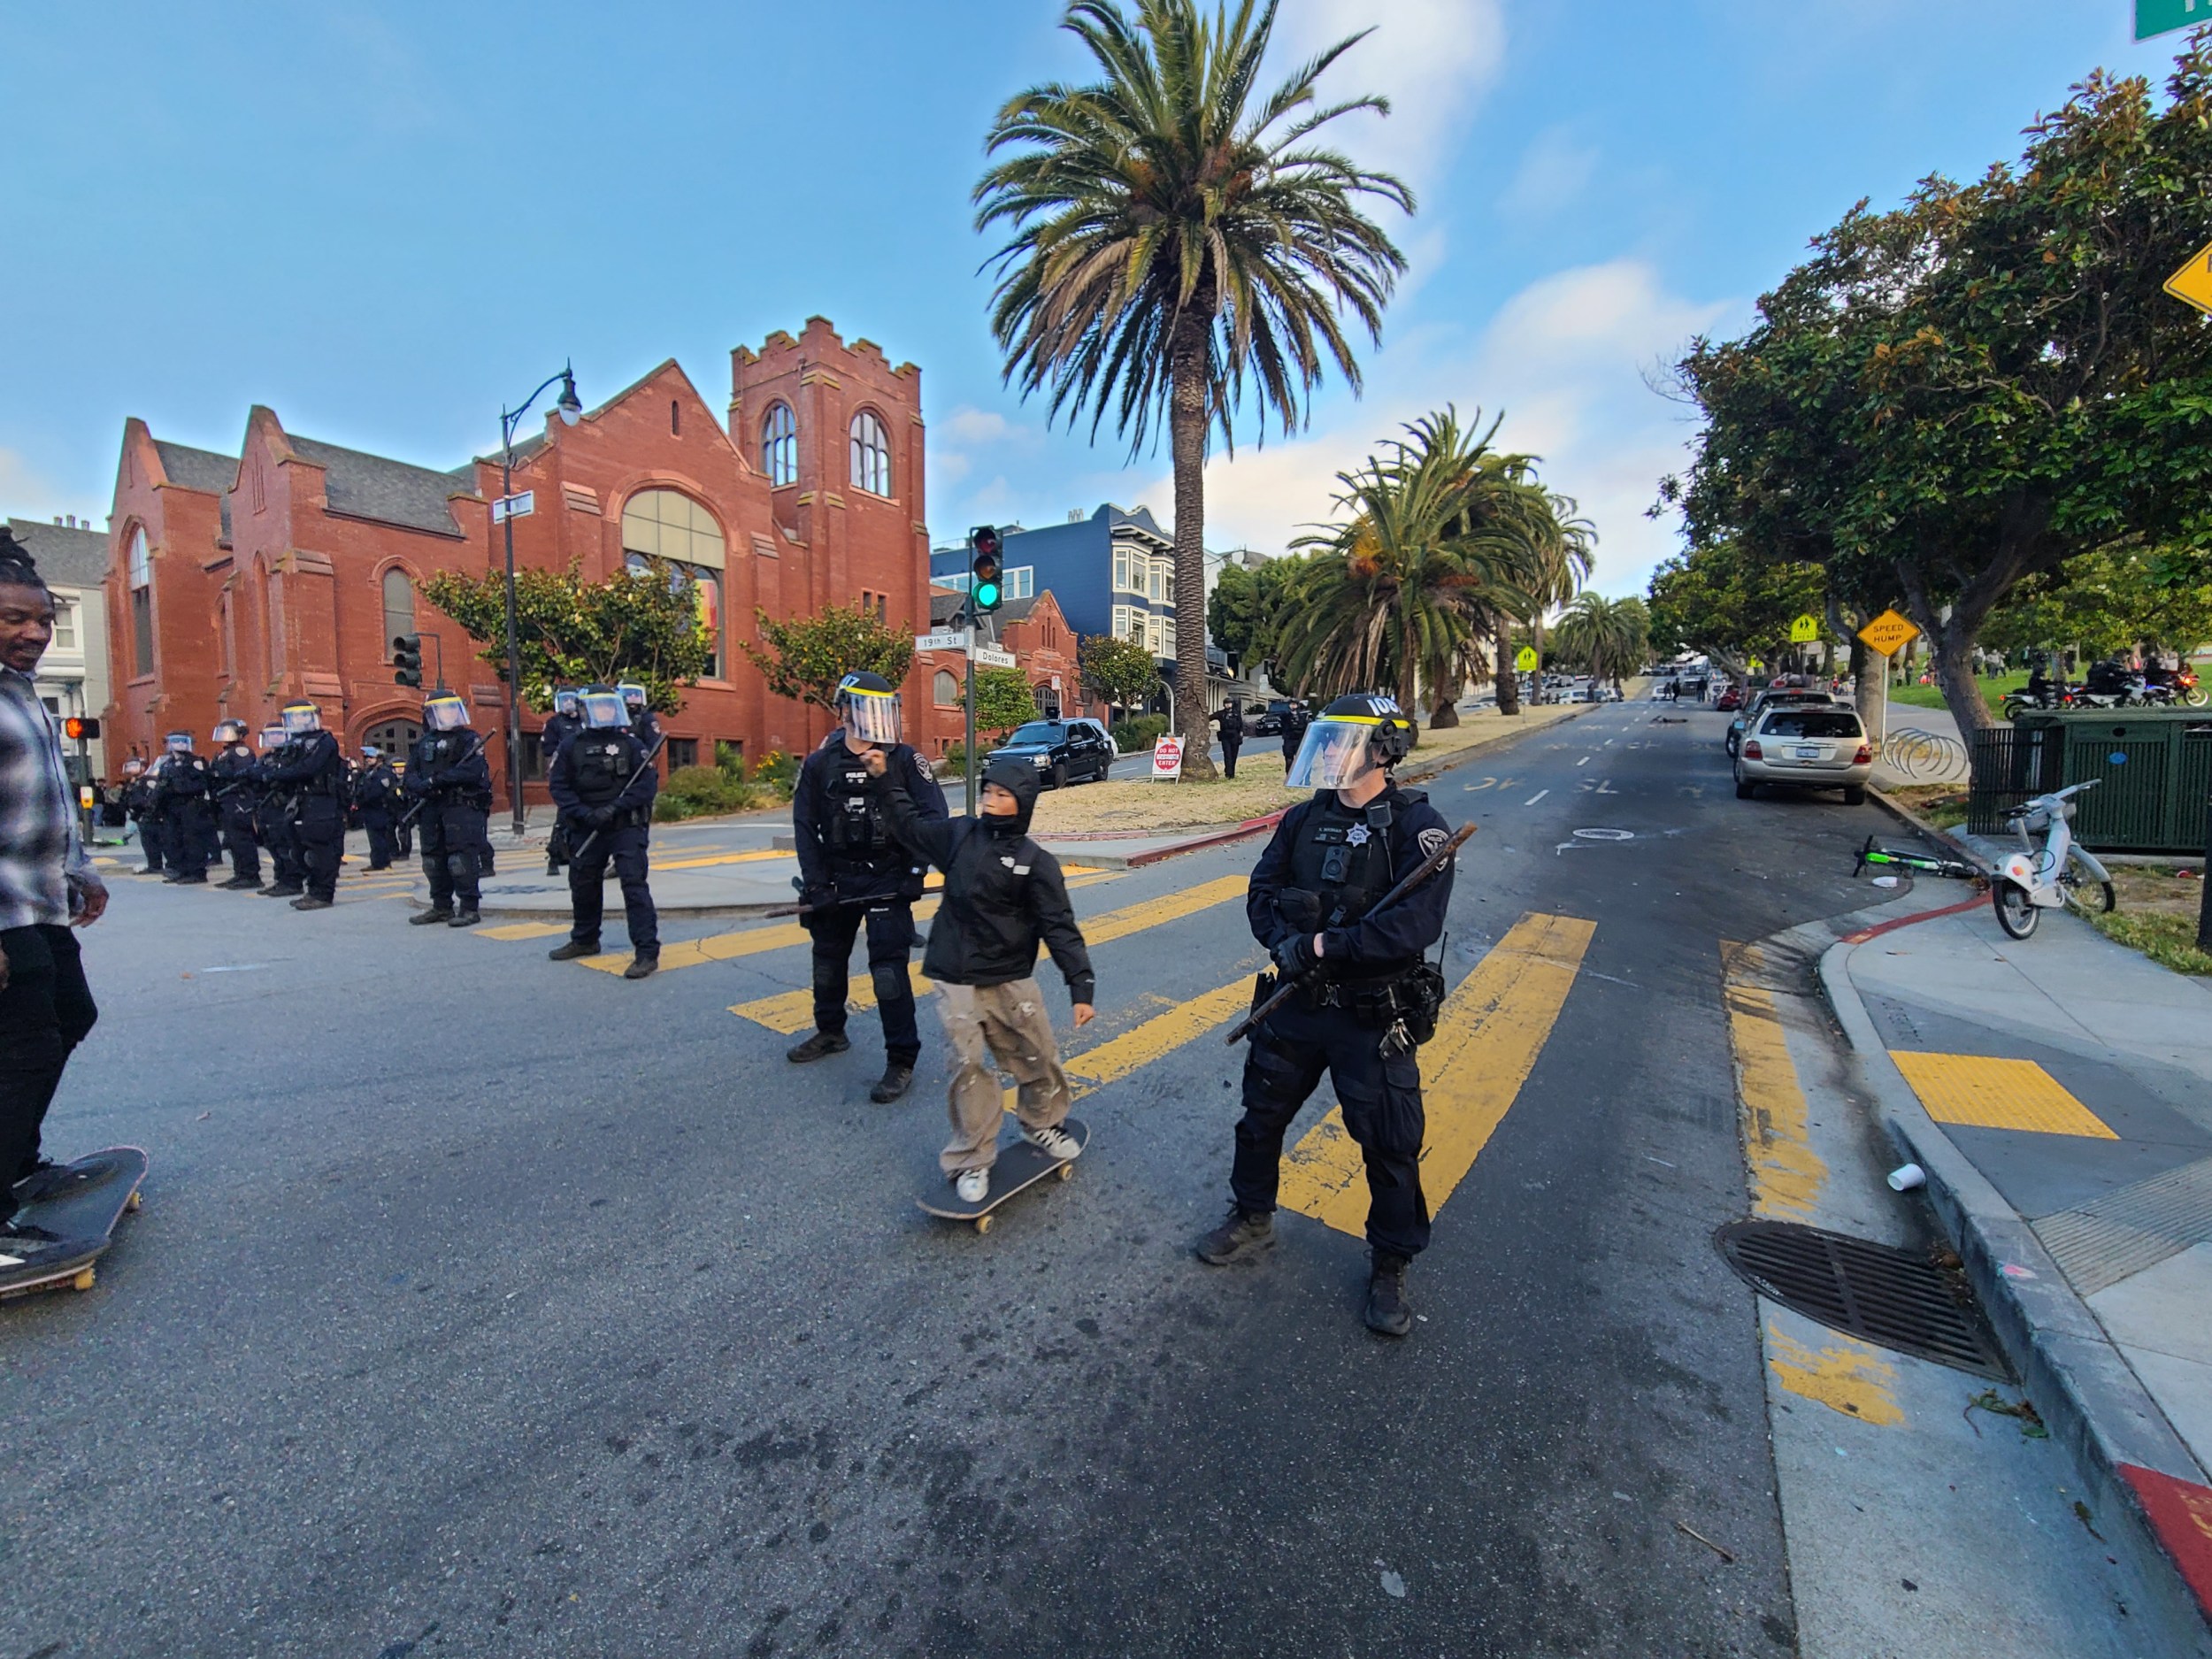 These images describe the events at the Dolores hill bomb, which included police responses to what they called a riot. 